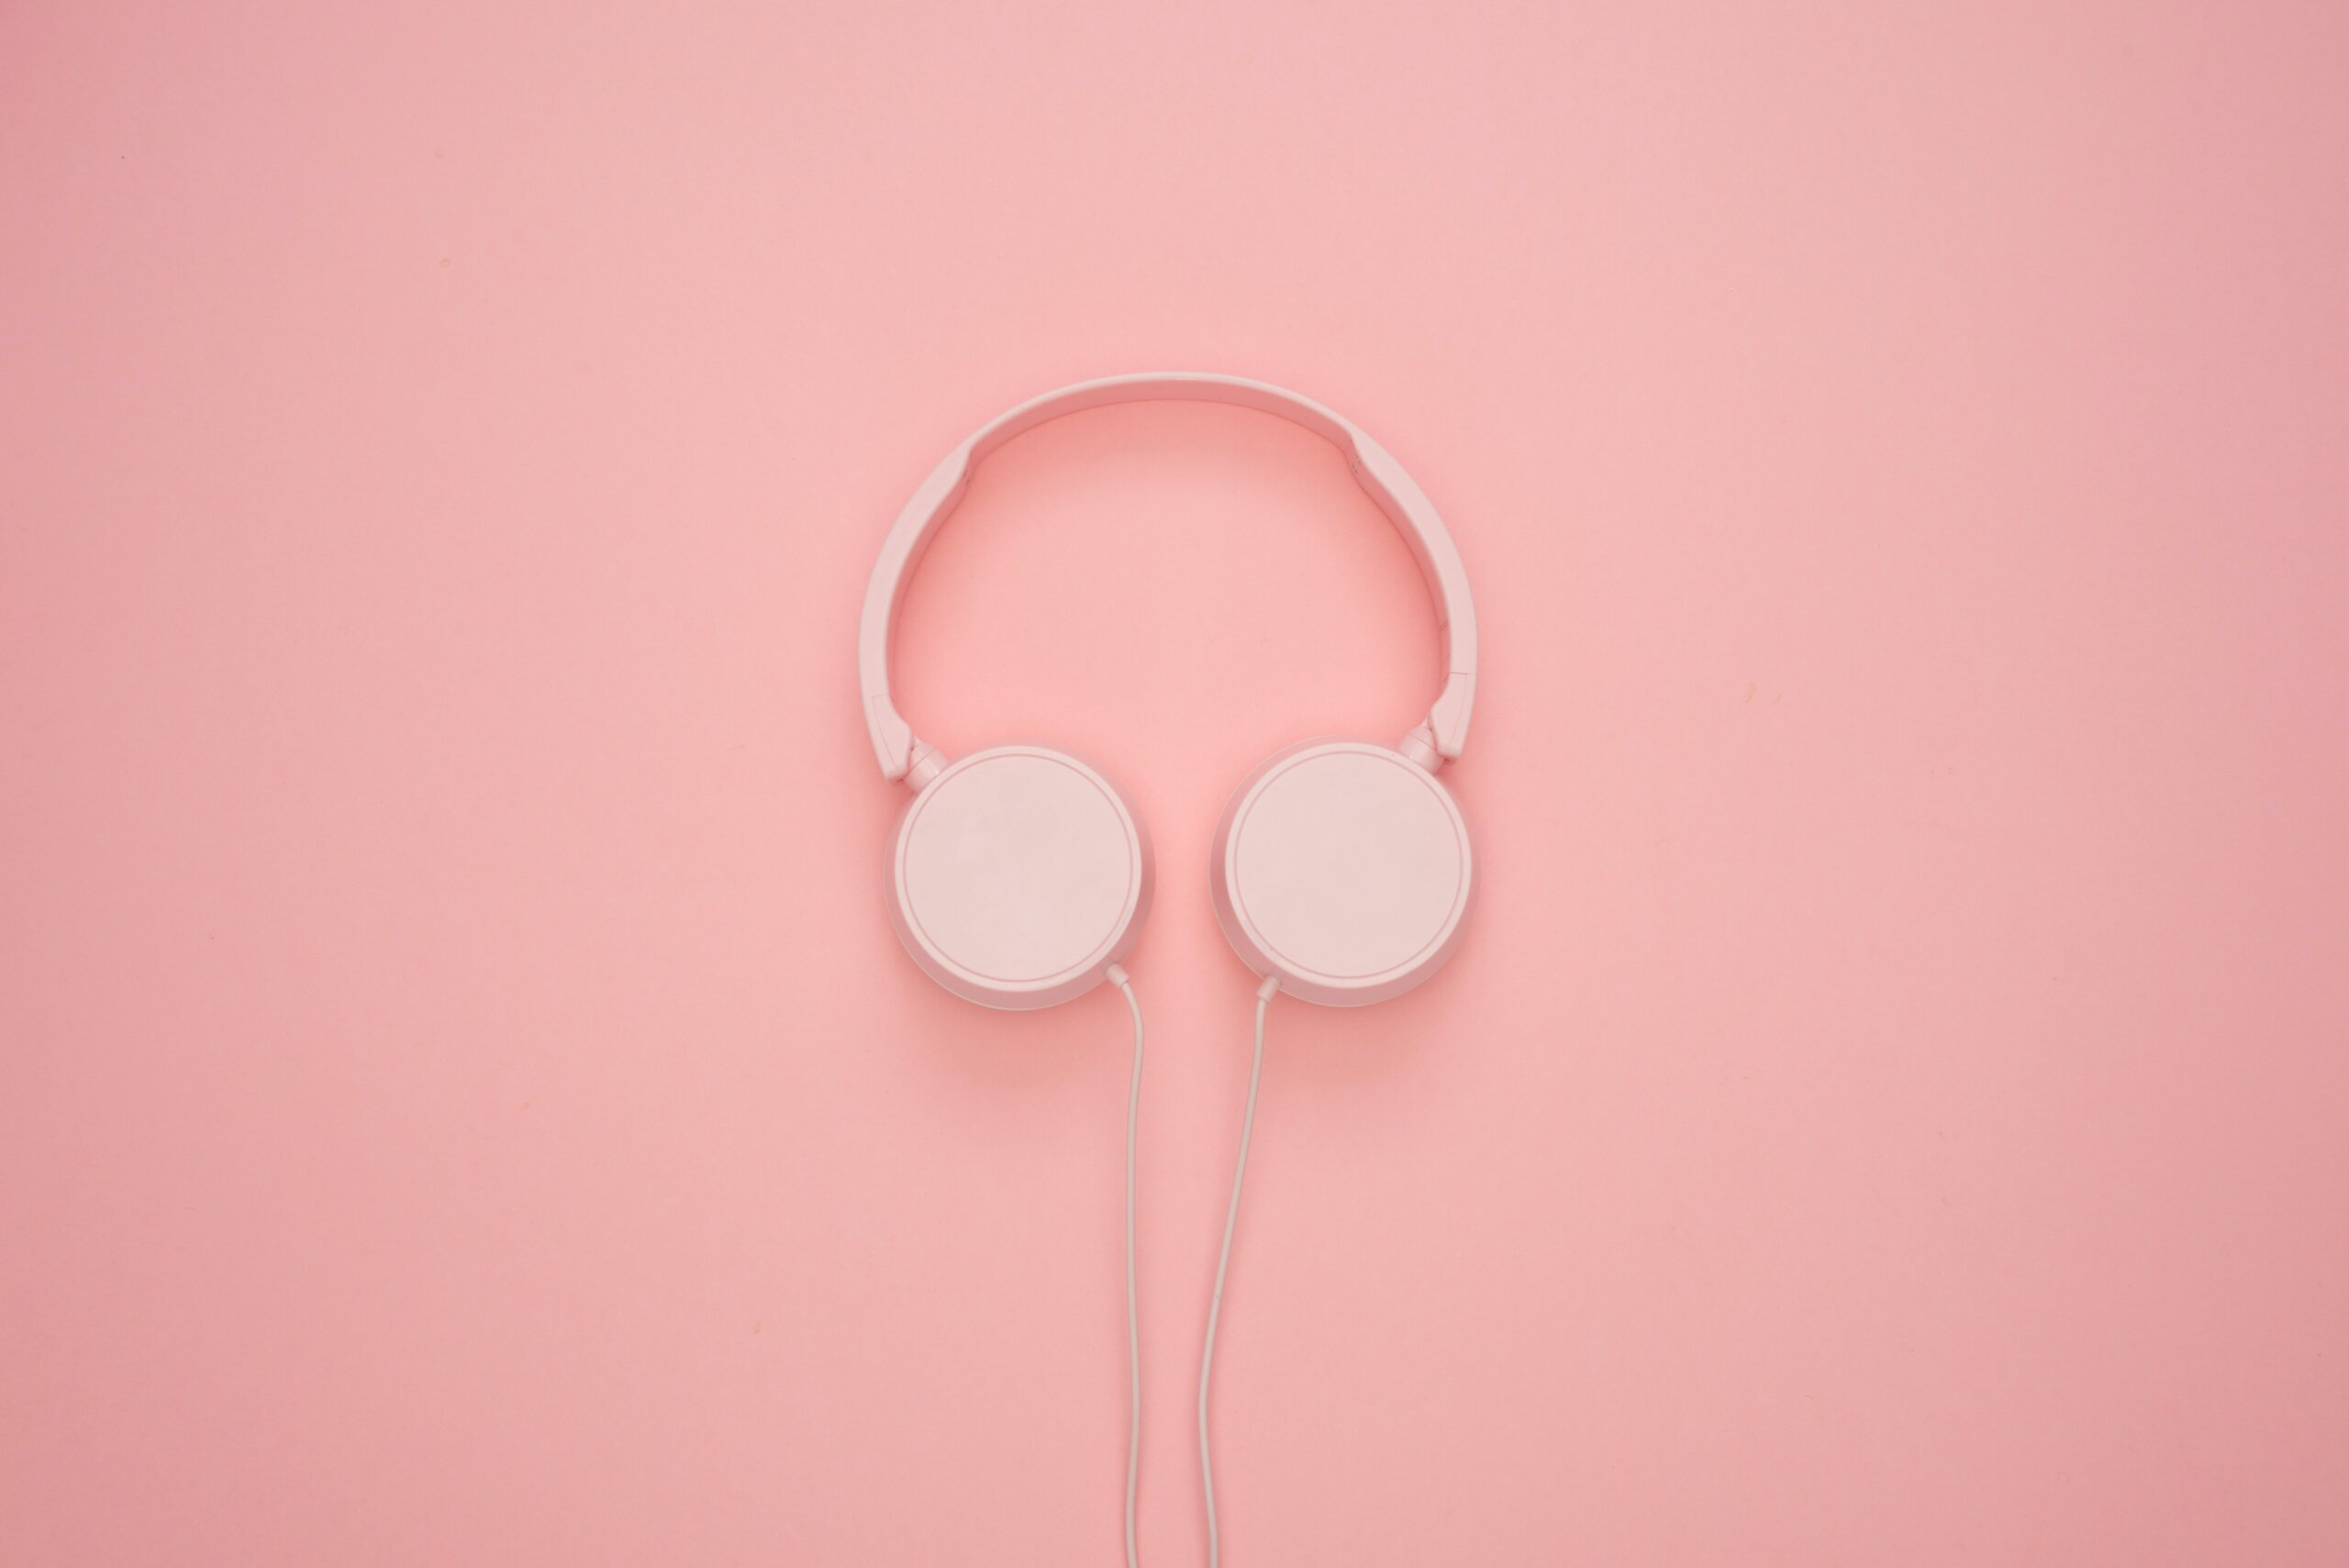 12 Podcasts for Nonprofits You Need on Your Radar